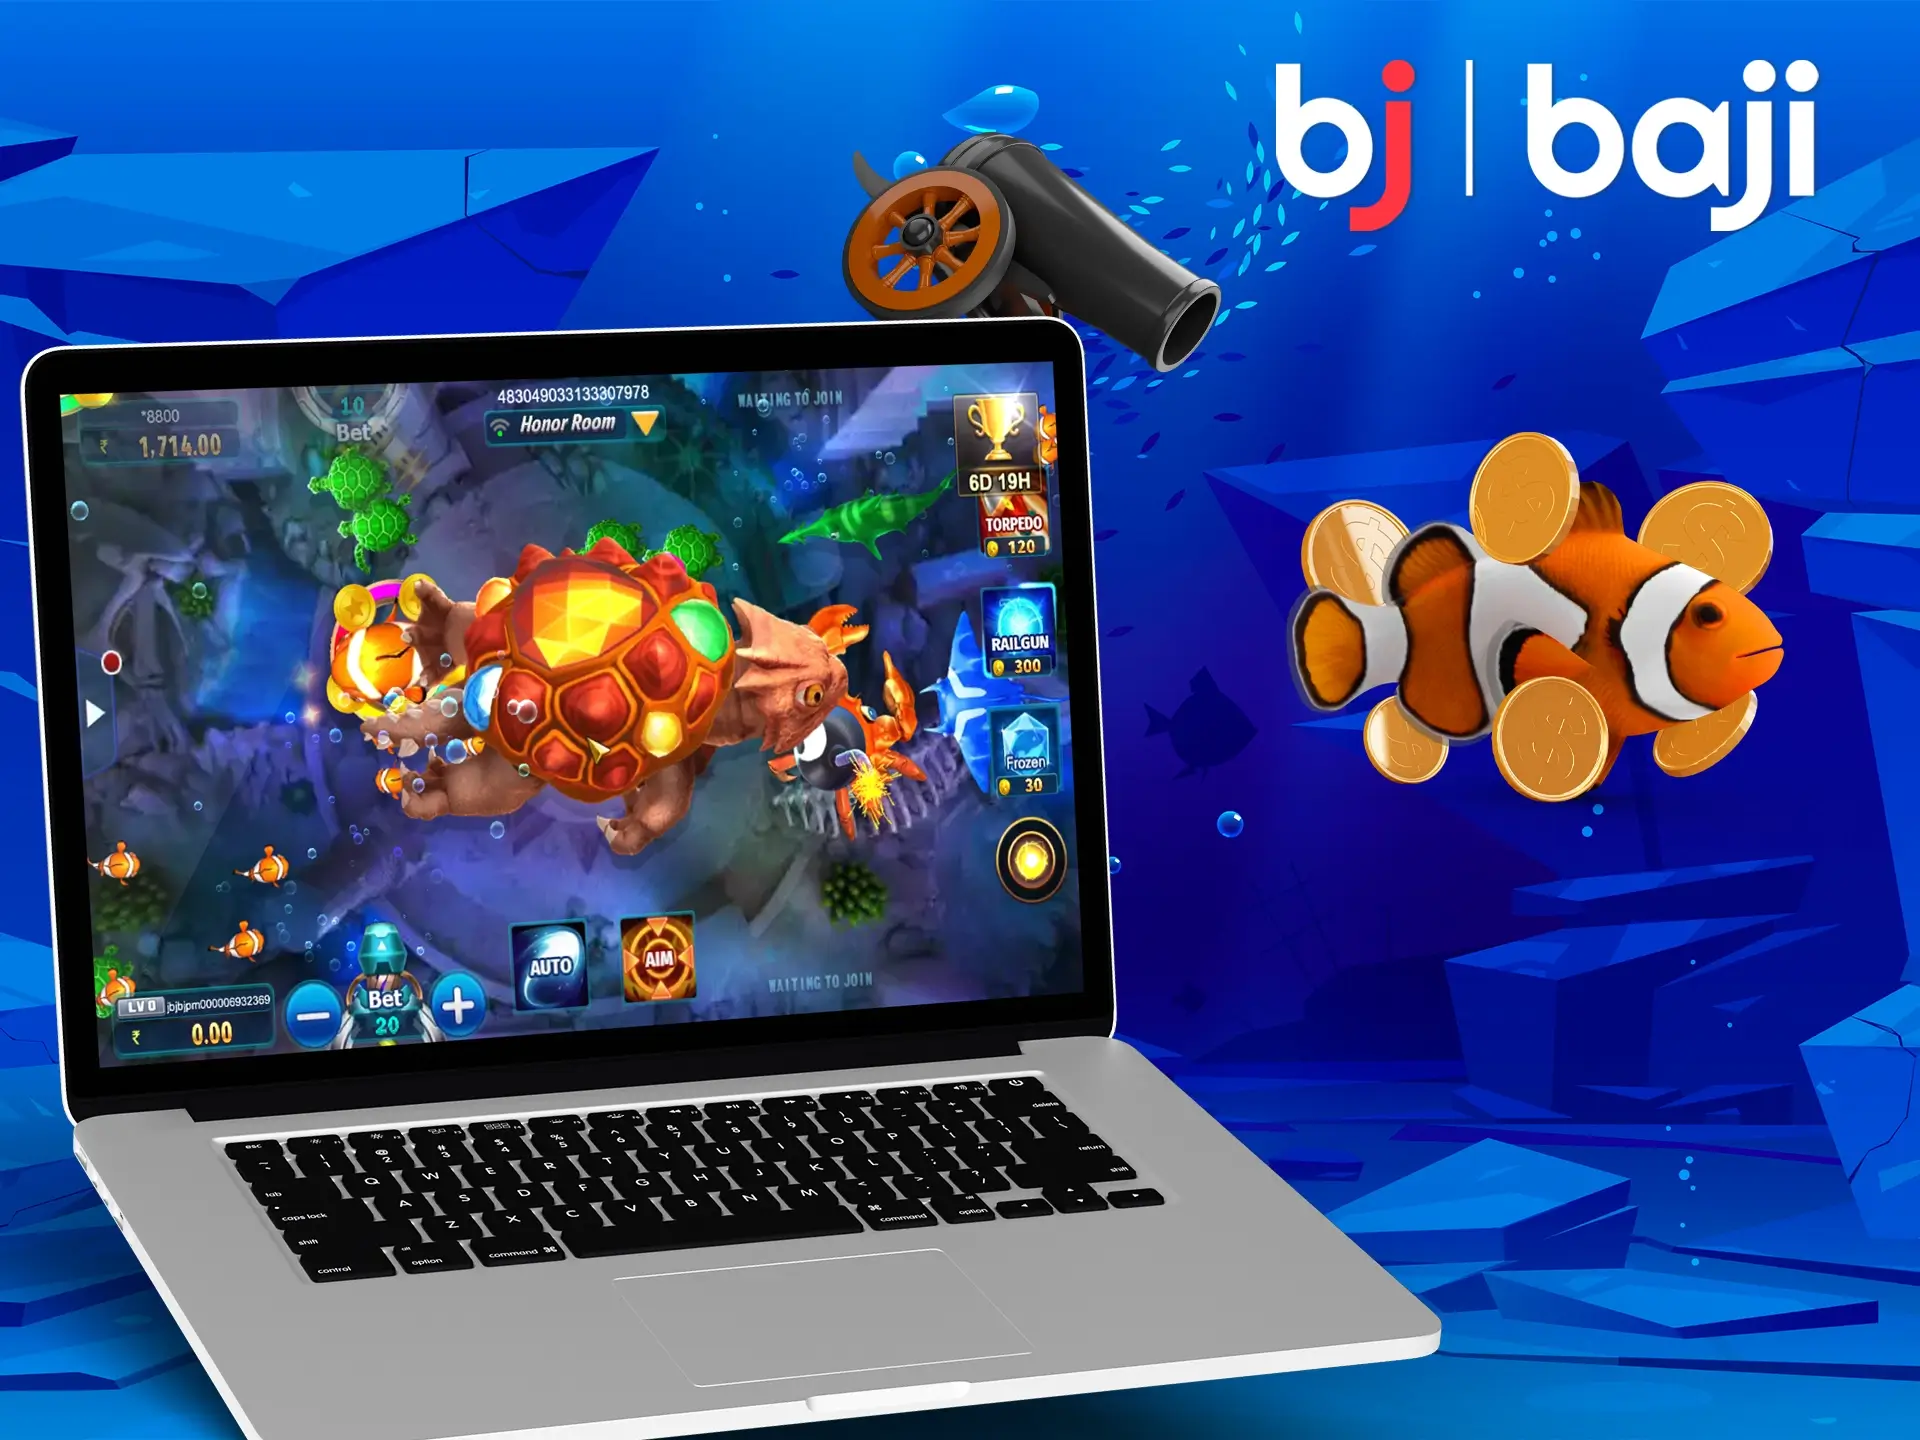 Choose your strategy, stock up on powerful weapons and go for victories with the fishy game in Baji.